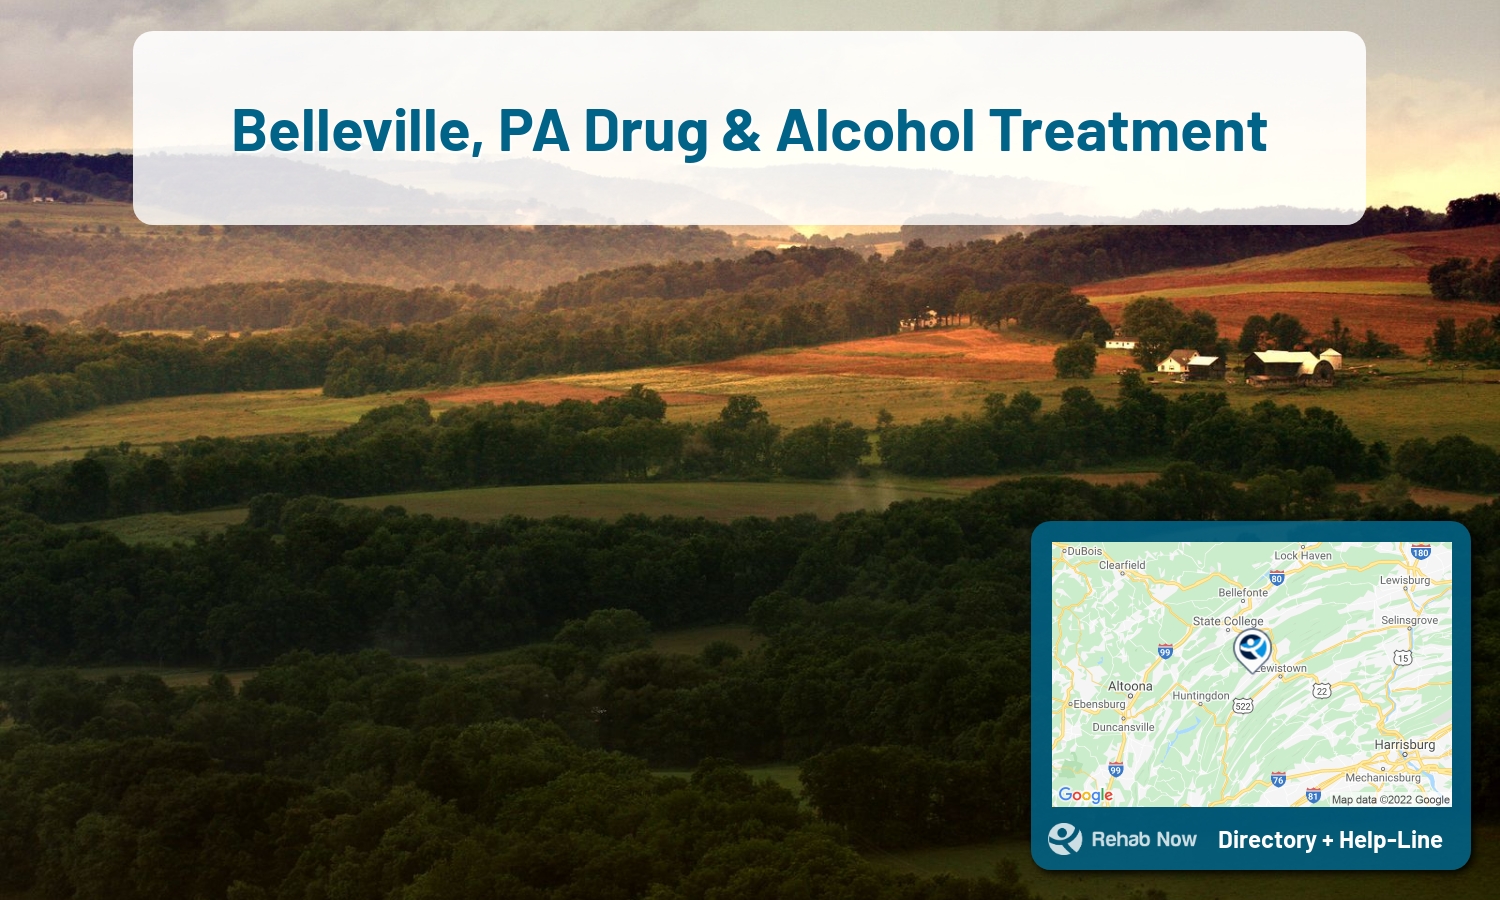 Drug rehab and alcohol treatment services nearby Belleville, PA. Need help choosing a treatment program? Call our free hotline!